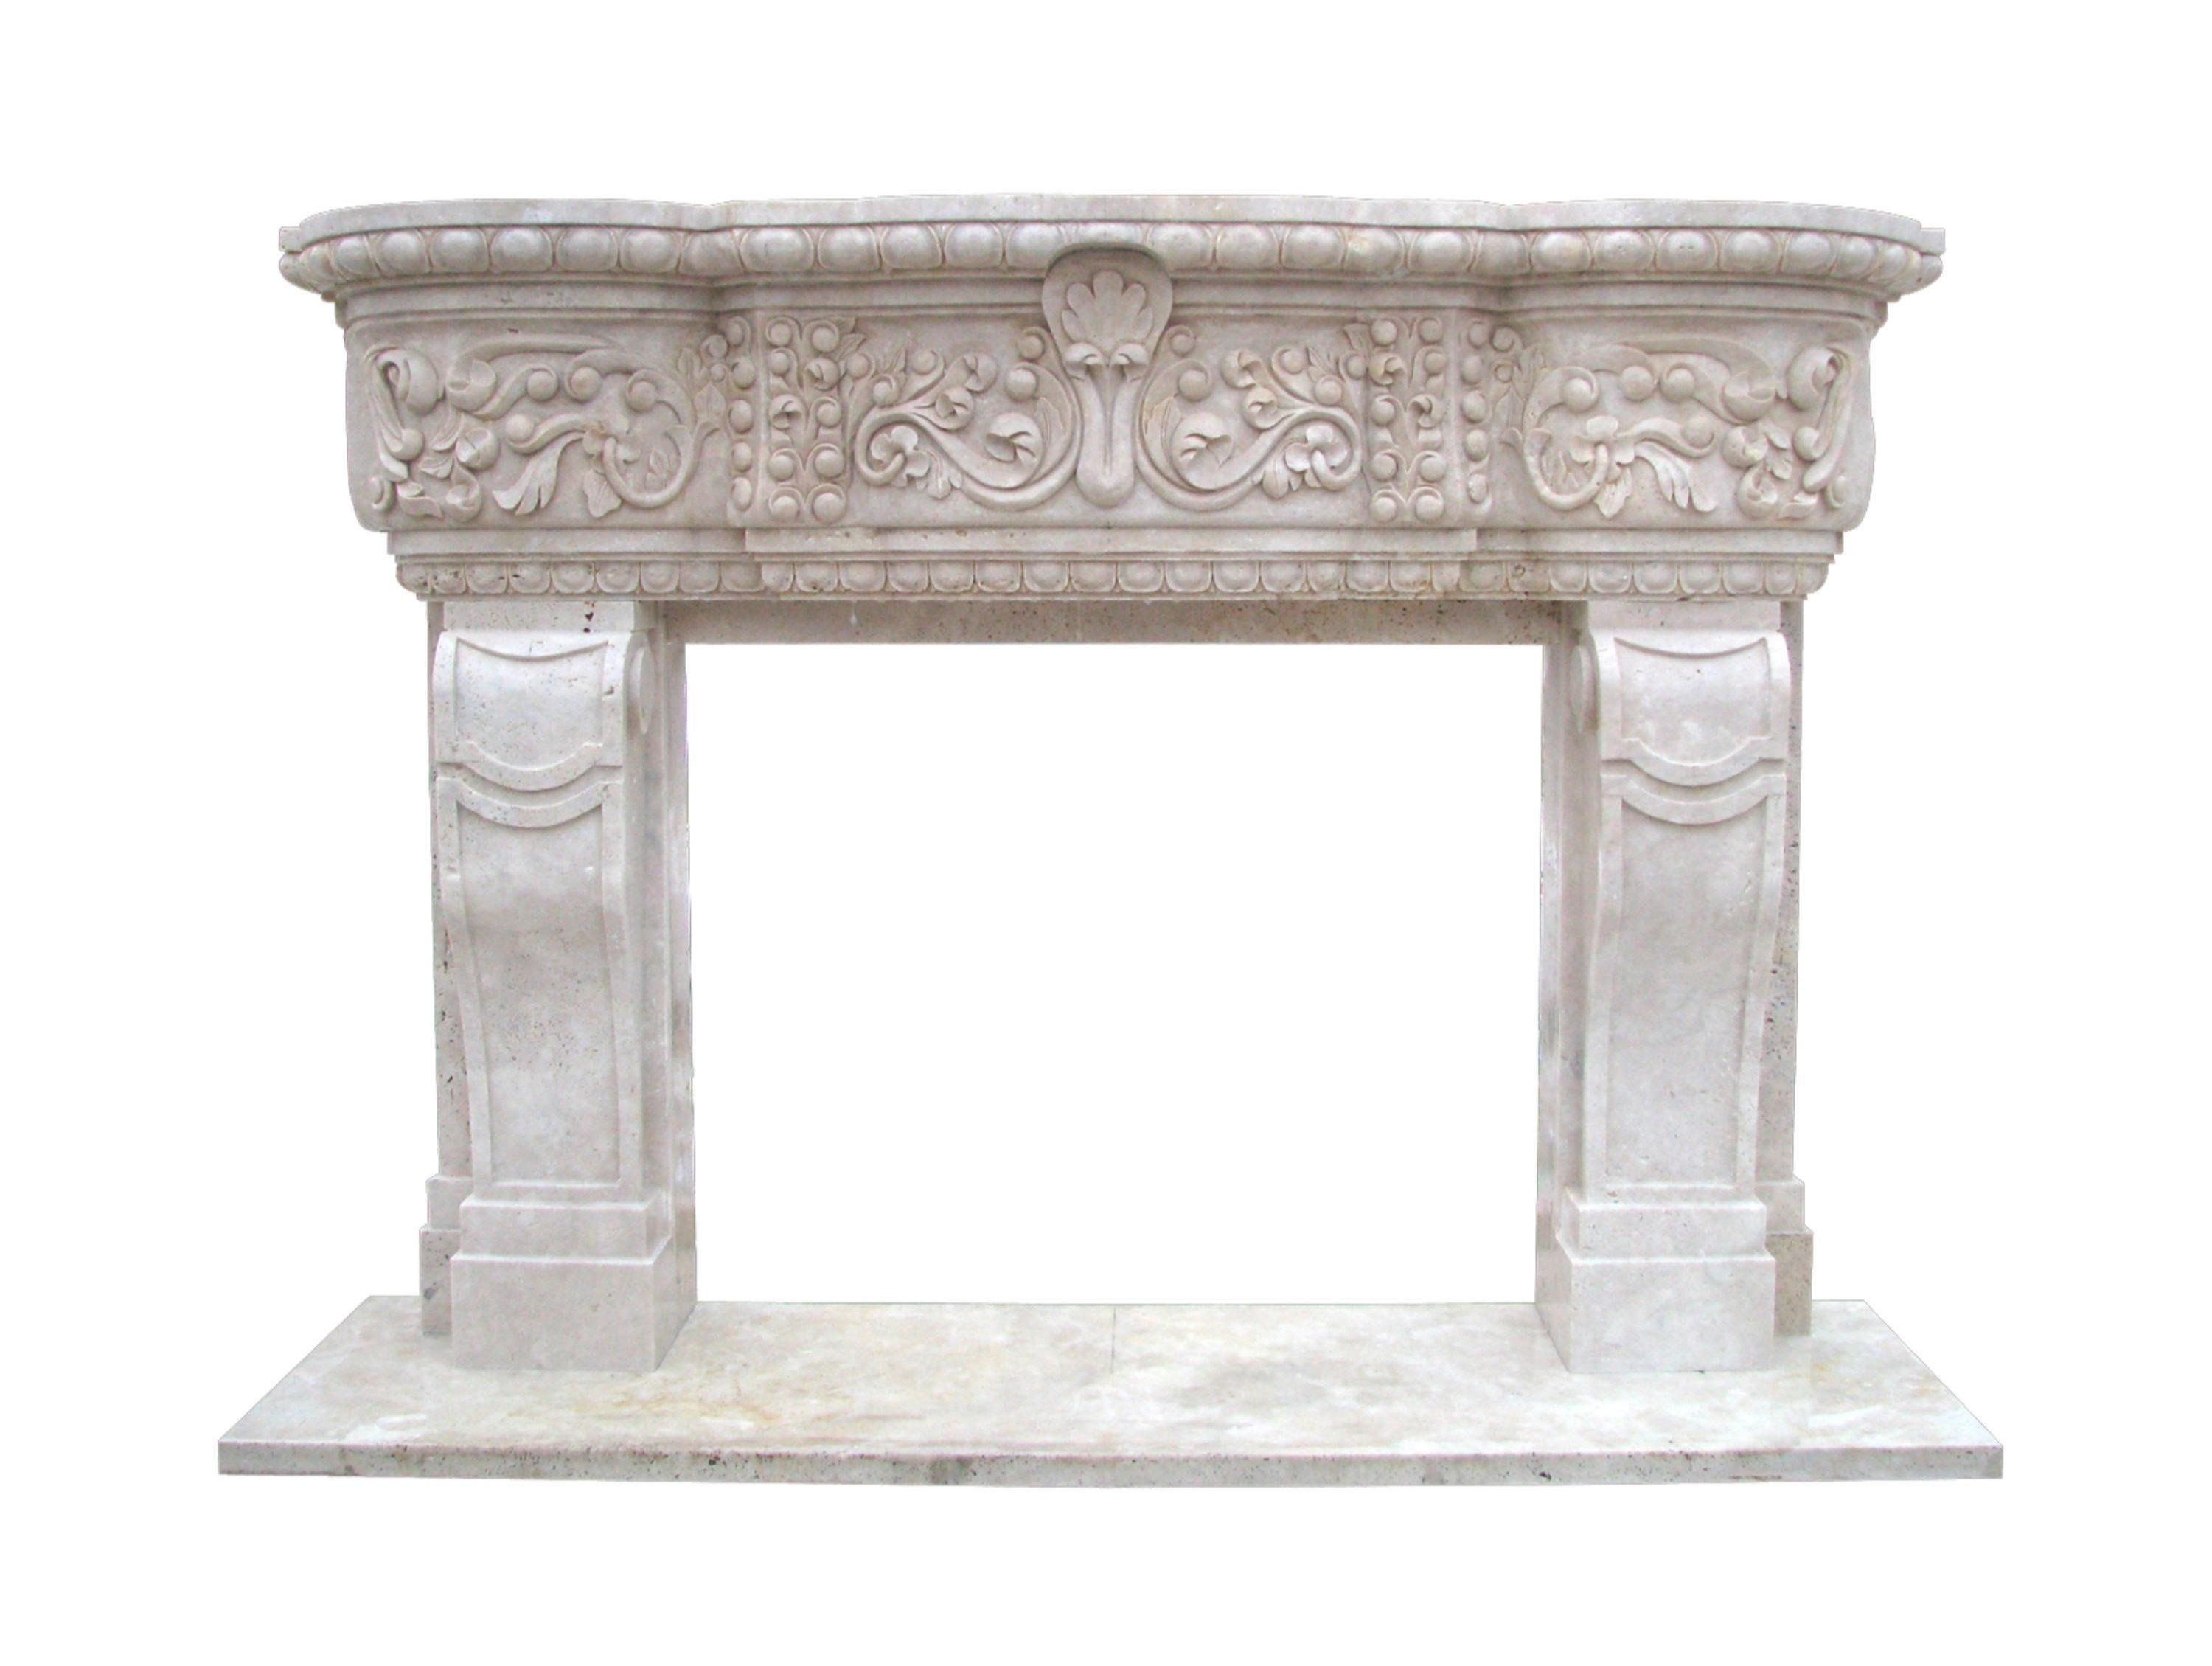 MAGNIFICENT CARVED TRAVERTINE MANTLE 2f8fd8